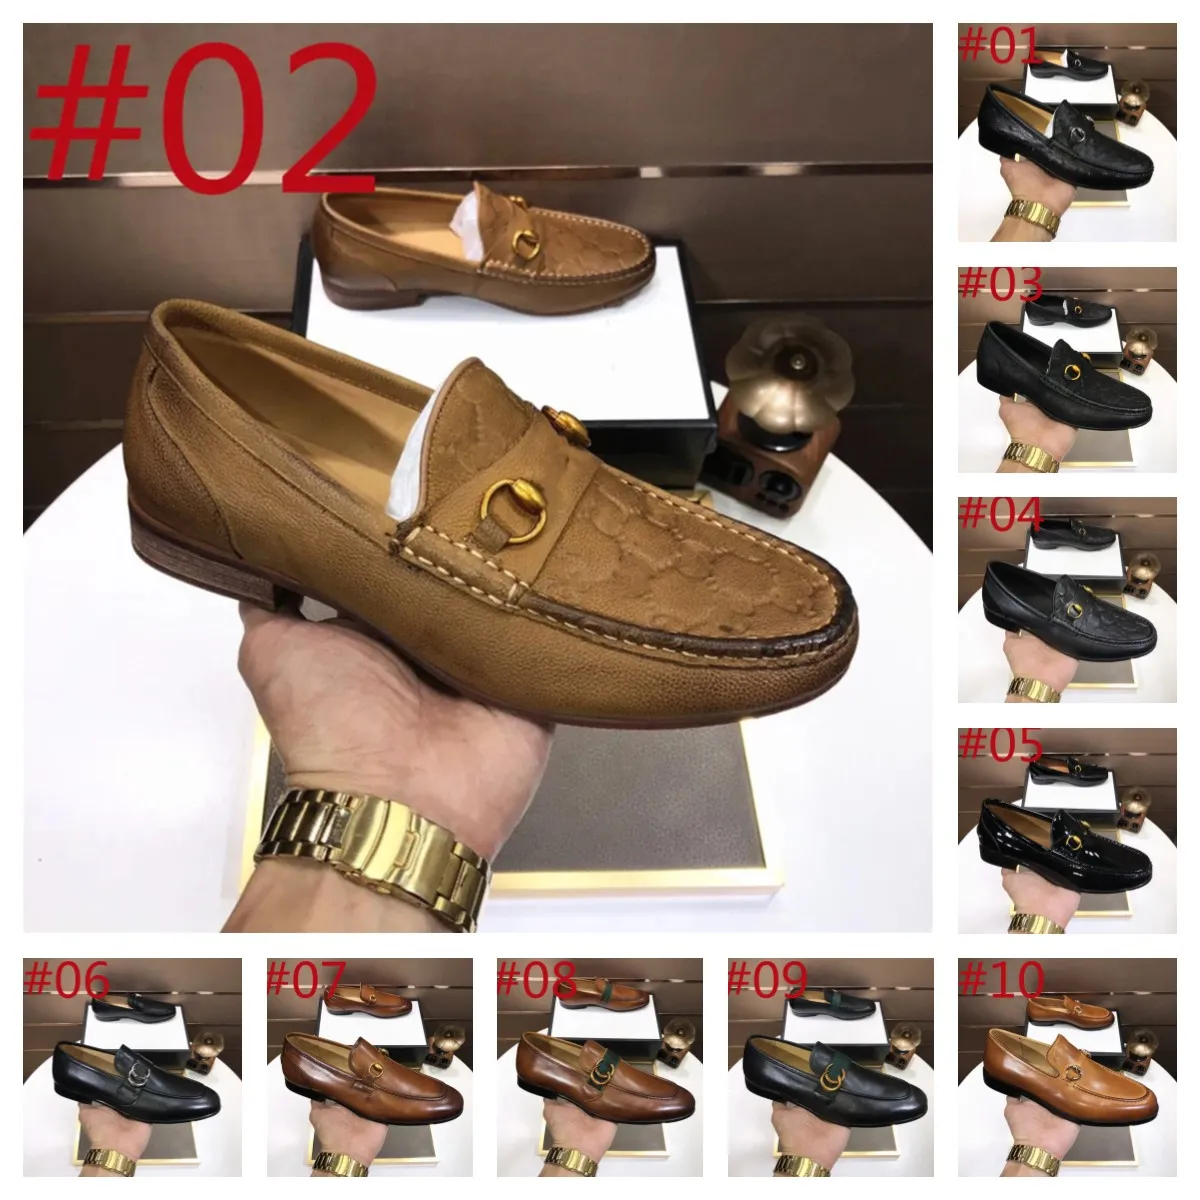 2023 Luxurious Designer Men Dress Shoes Genuine Leather Black brown Moccasins Business Handmade Shoe Formal Party Office Wedding Men Loafers Shoes size 38-46